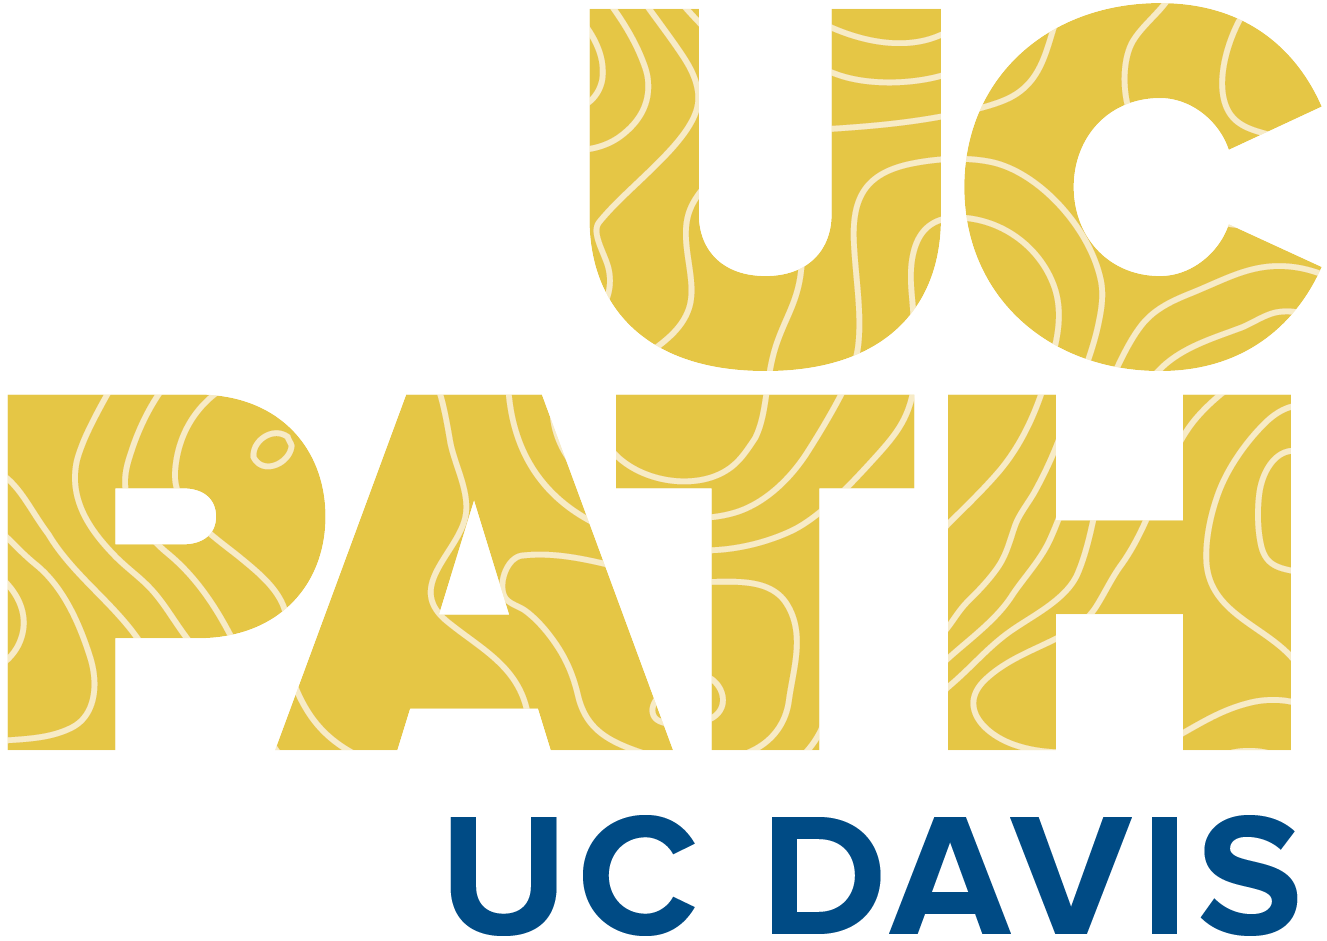 UCPath for UC Davis employees